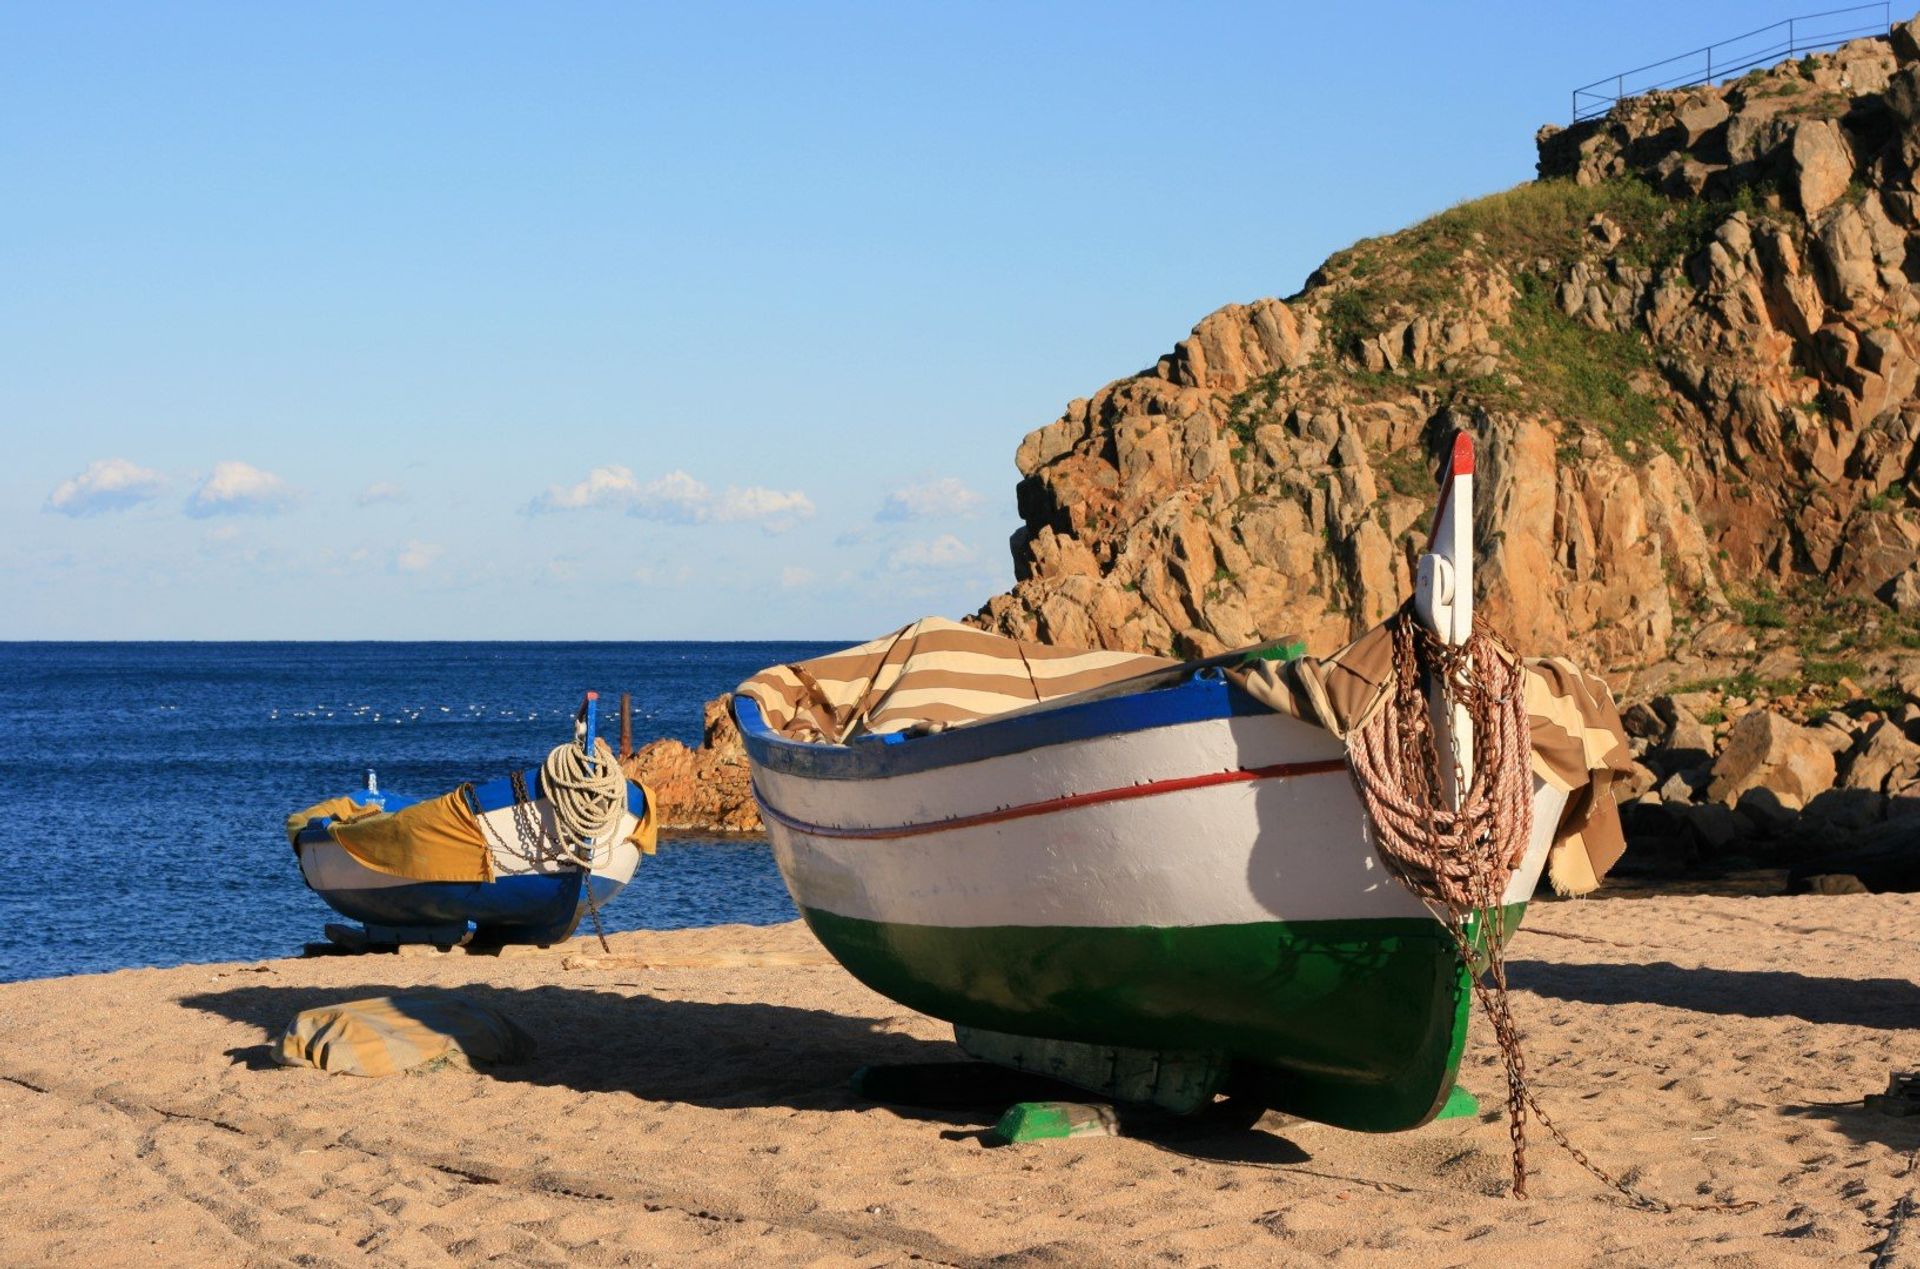 Authentic Spain - traditional fishing boats along the coast